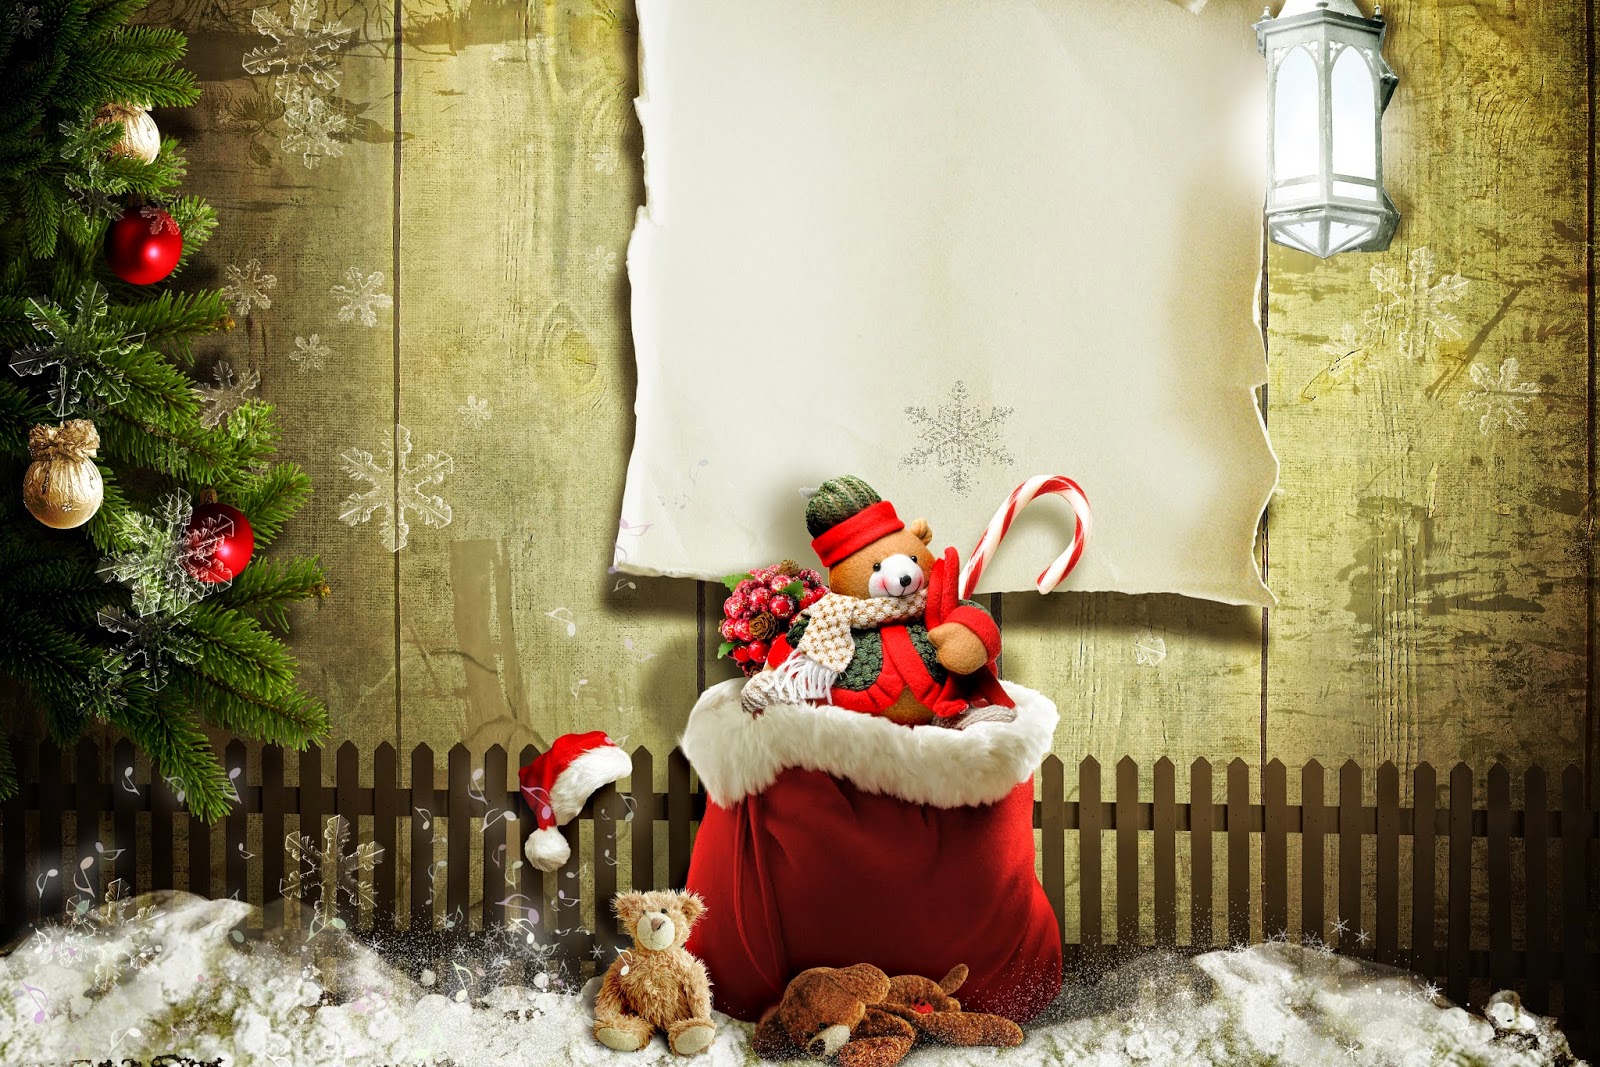 Download Tatty Teddy Wallpapers To Your Cell Phone - Christmas Gift Wallpaper Hd - HD Wallpaper 